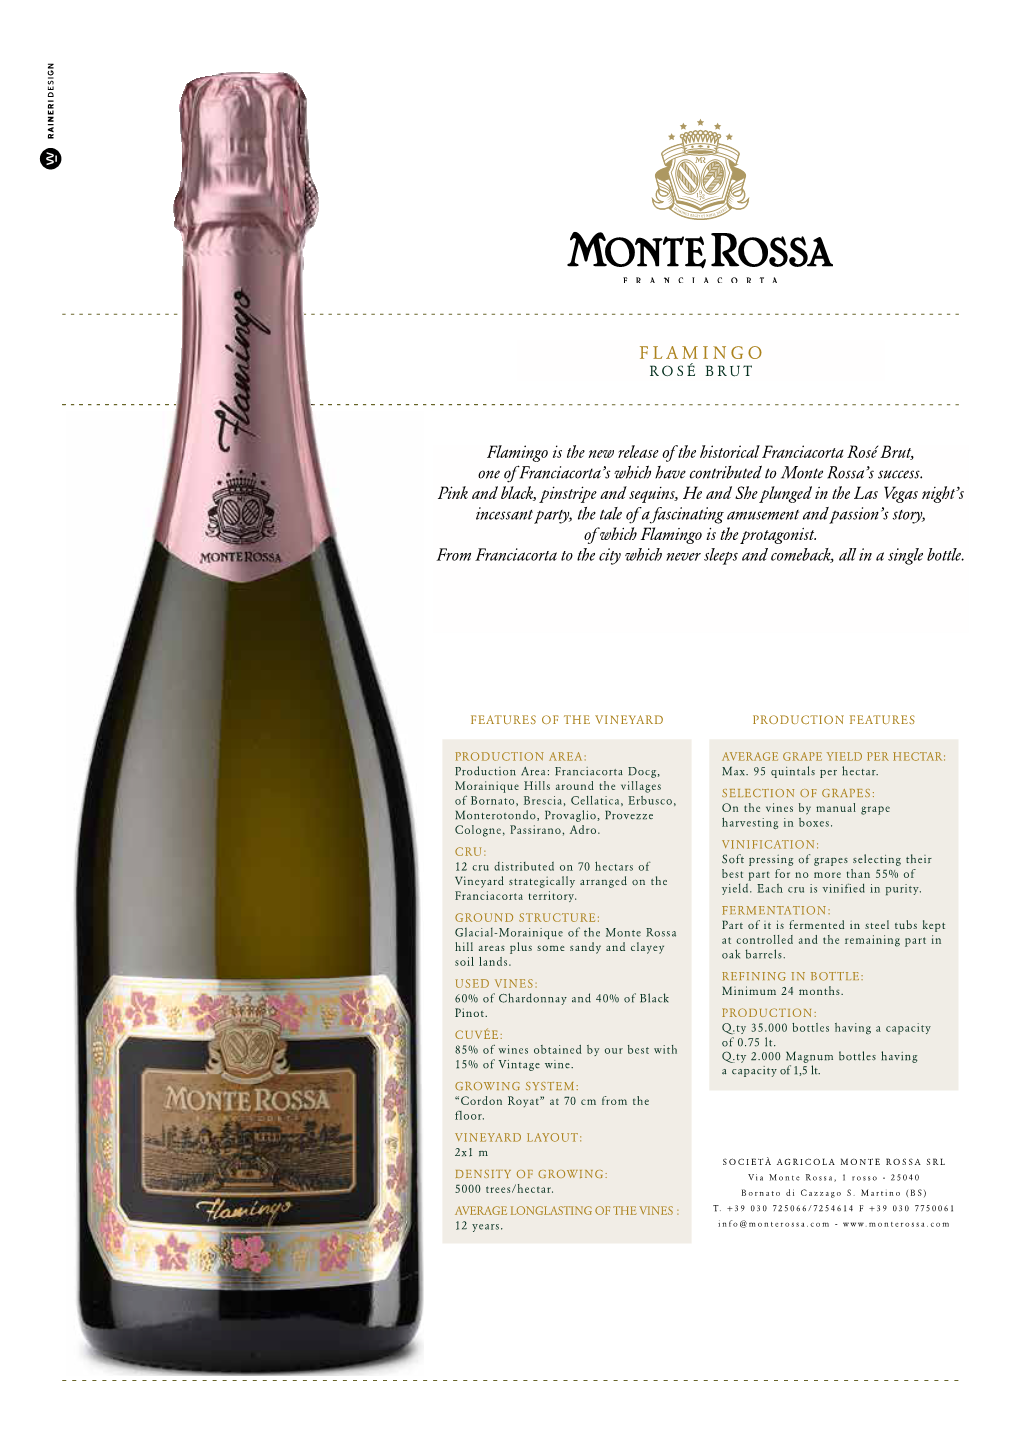 Flamingo Is the New Release of the Historical Franciacorta Rosé Brut, One of Franciacorta’S Which Have Contributed to Monte Rossa’S Success